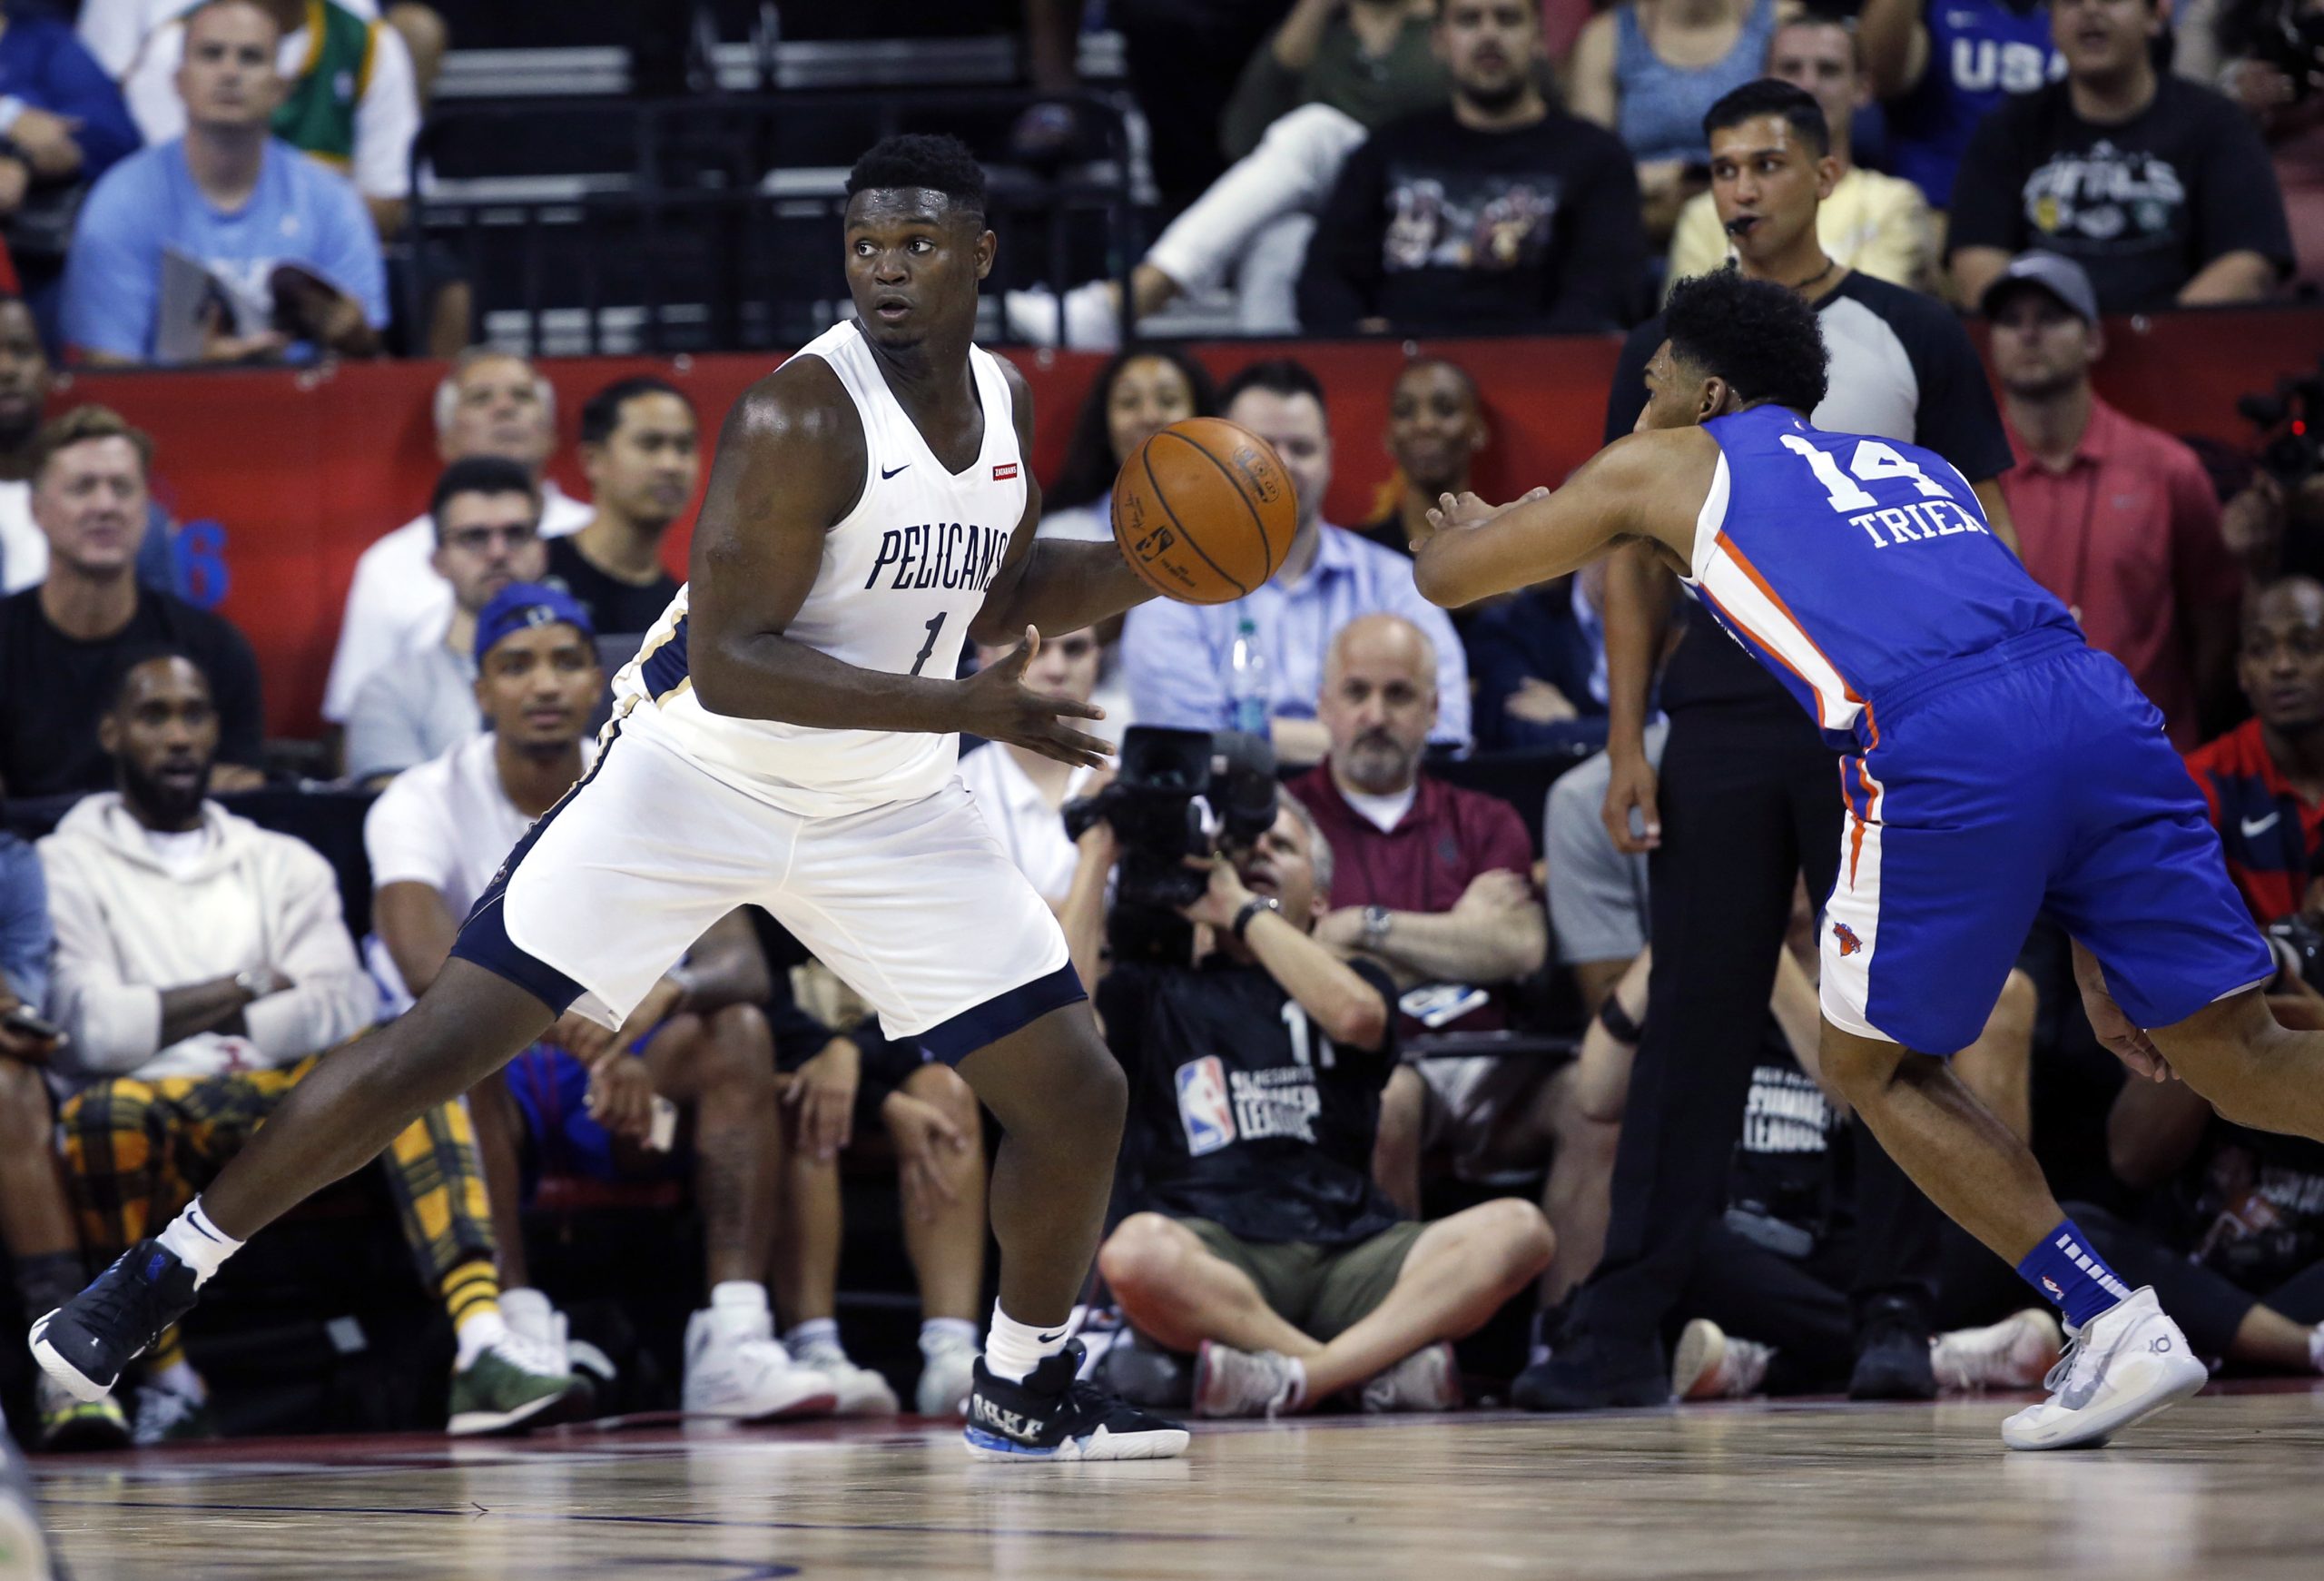 New Orleans Pelicans' Zion Williamson (1) looks to pass the ball during the team's NBA summer league basketball game against the New York Knicks on Friday, July 5, 2019, in Las Vegas. Knicks' Allonzo Trier is at right. (AP Photo/Steve Marcus)